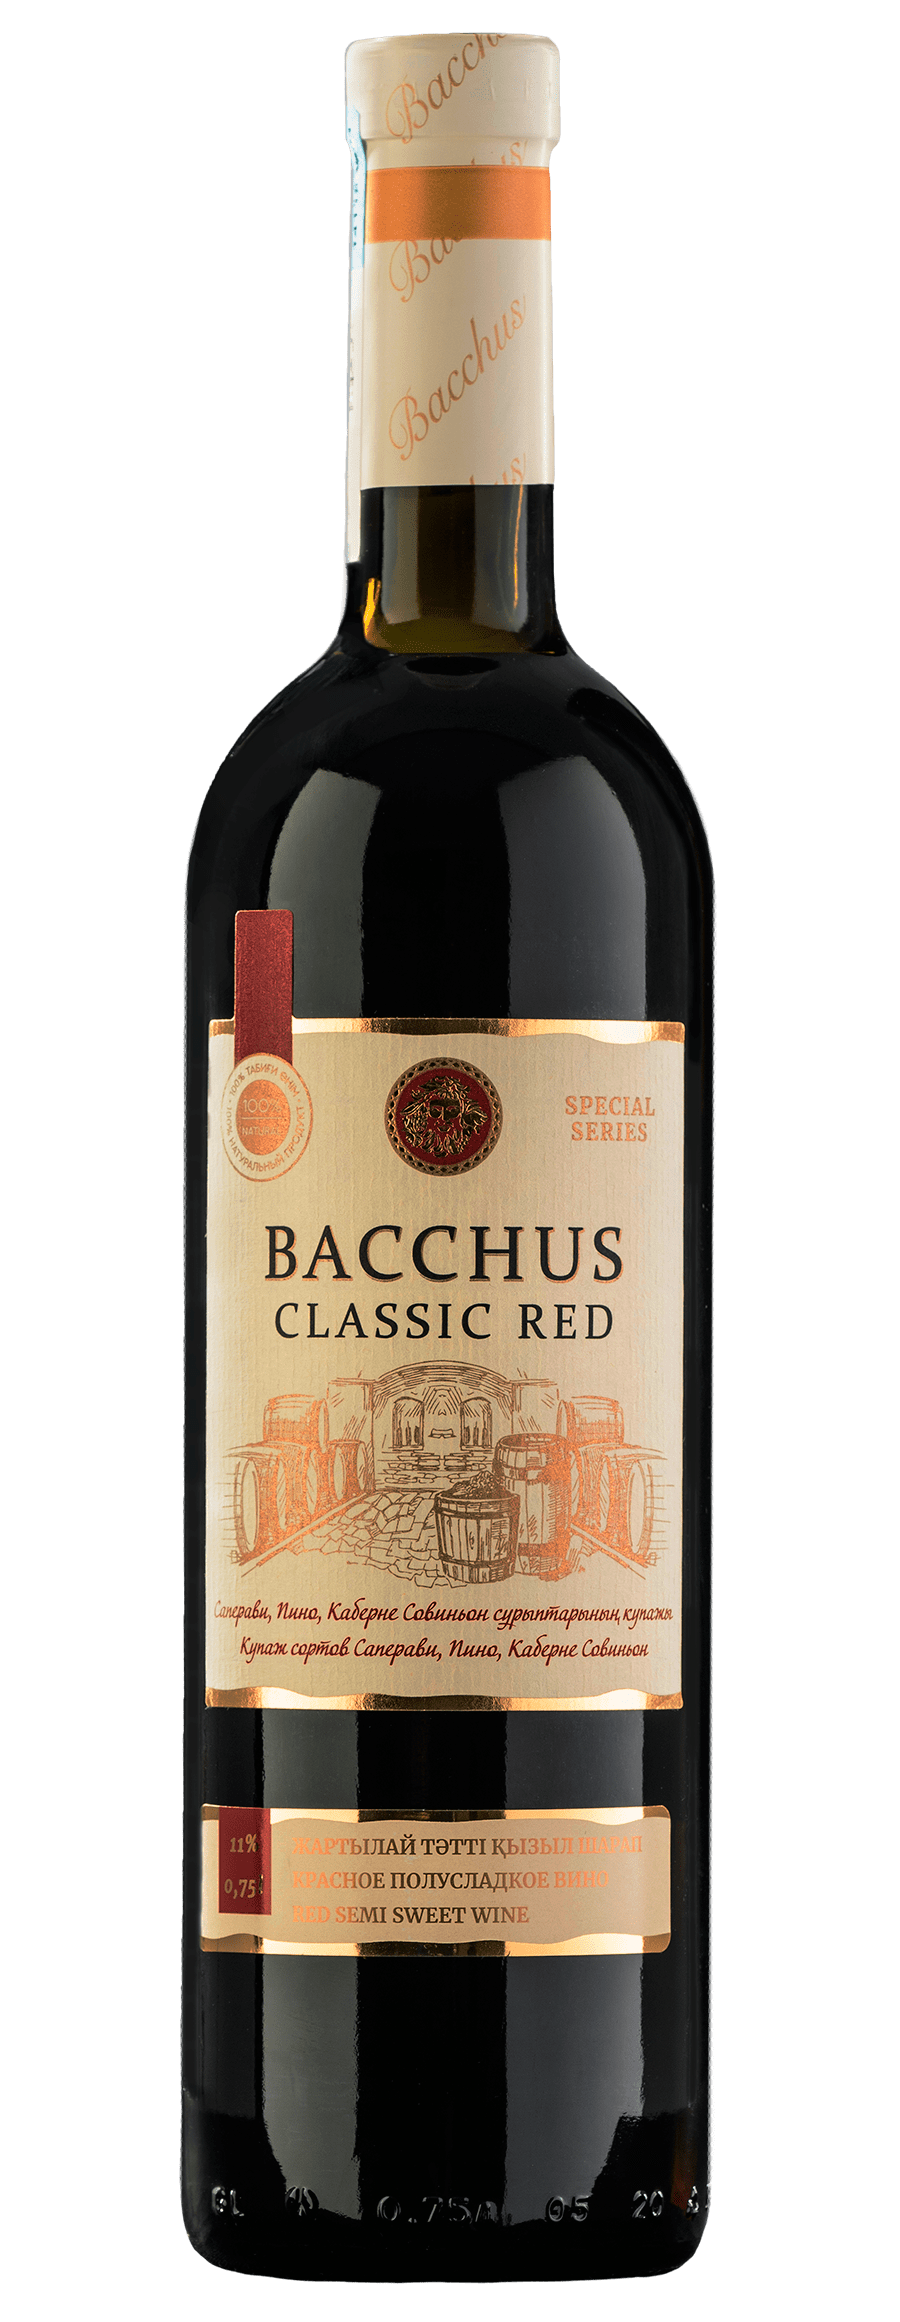 Bacchus classic red